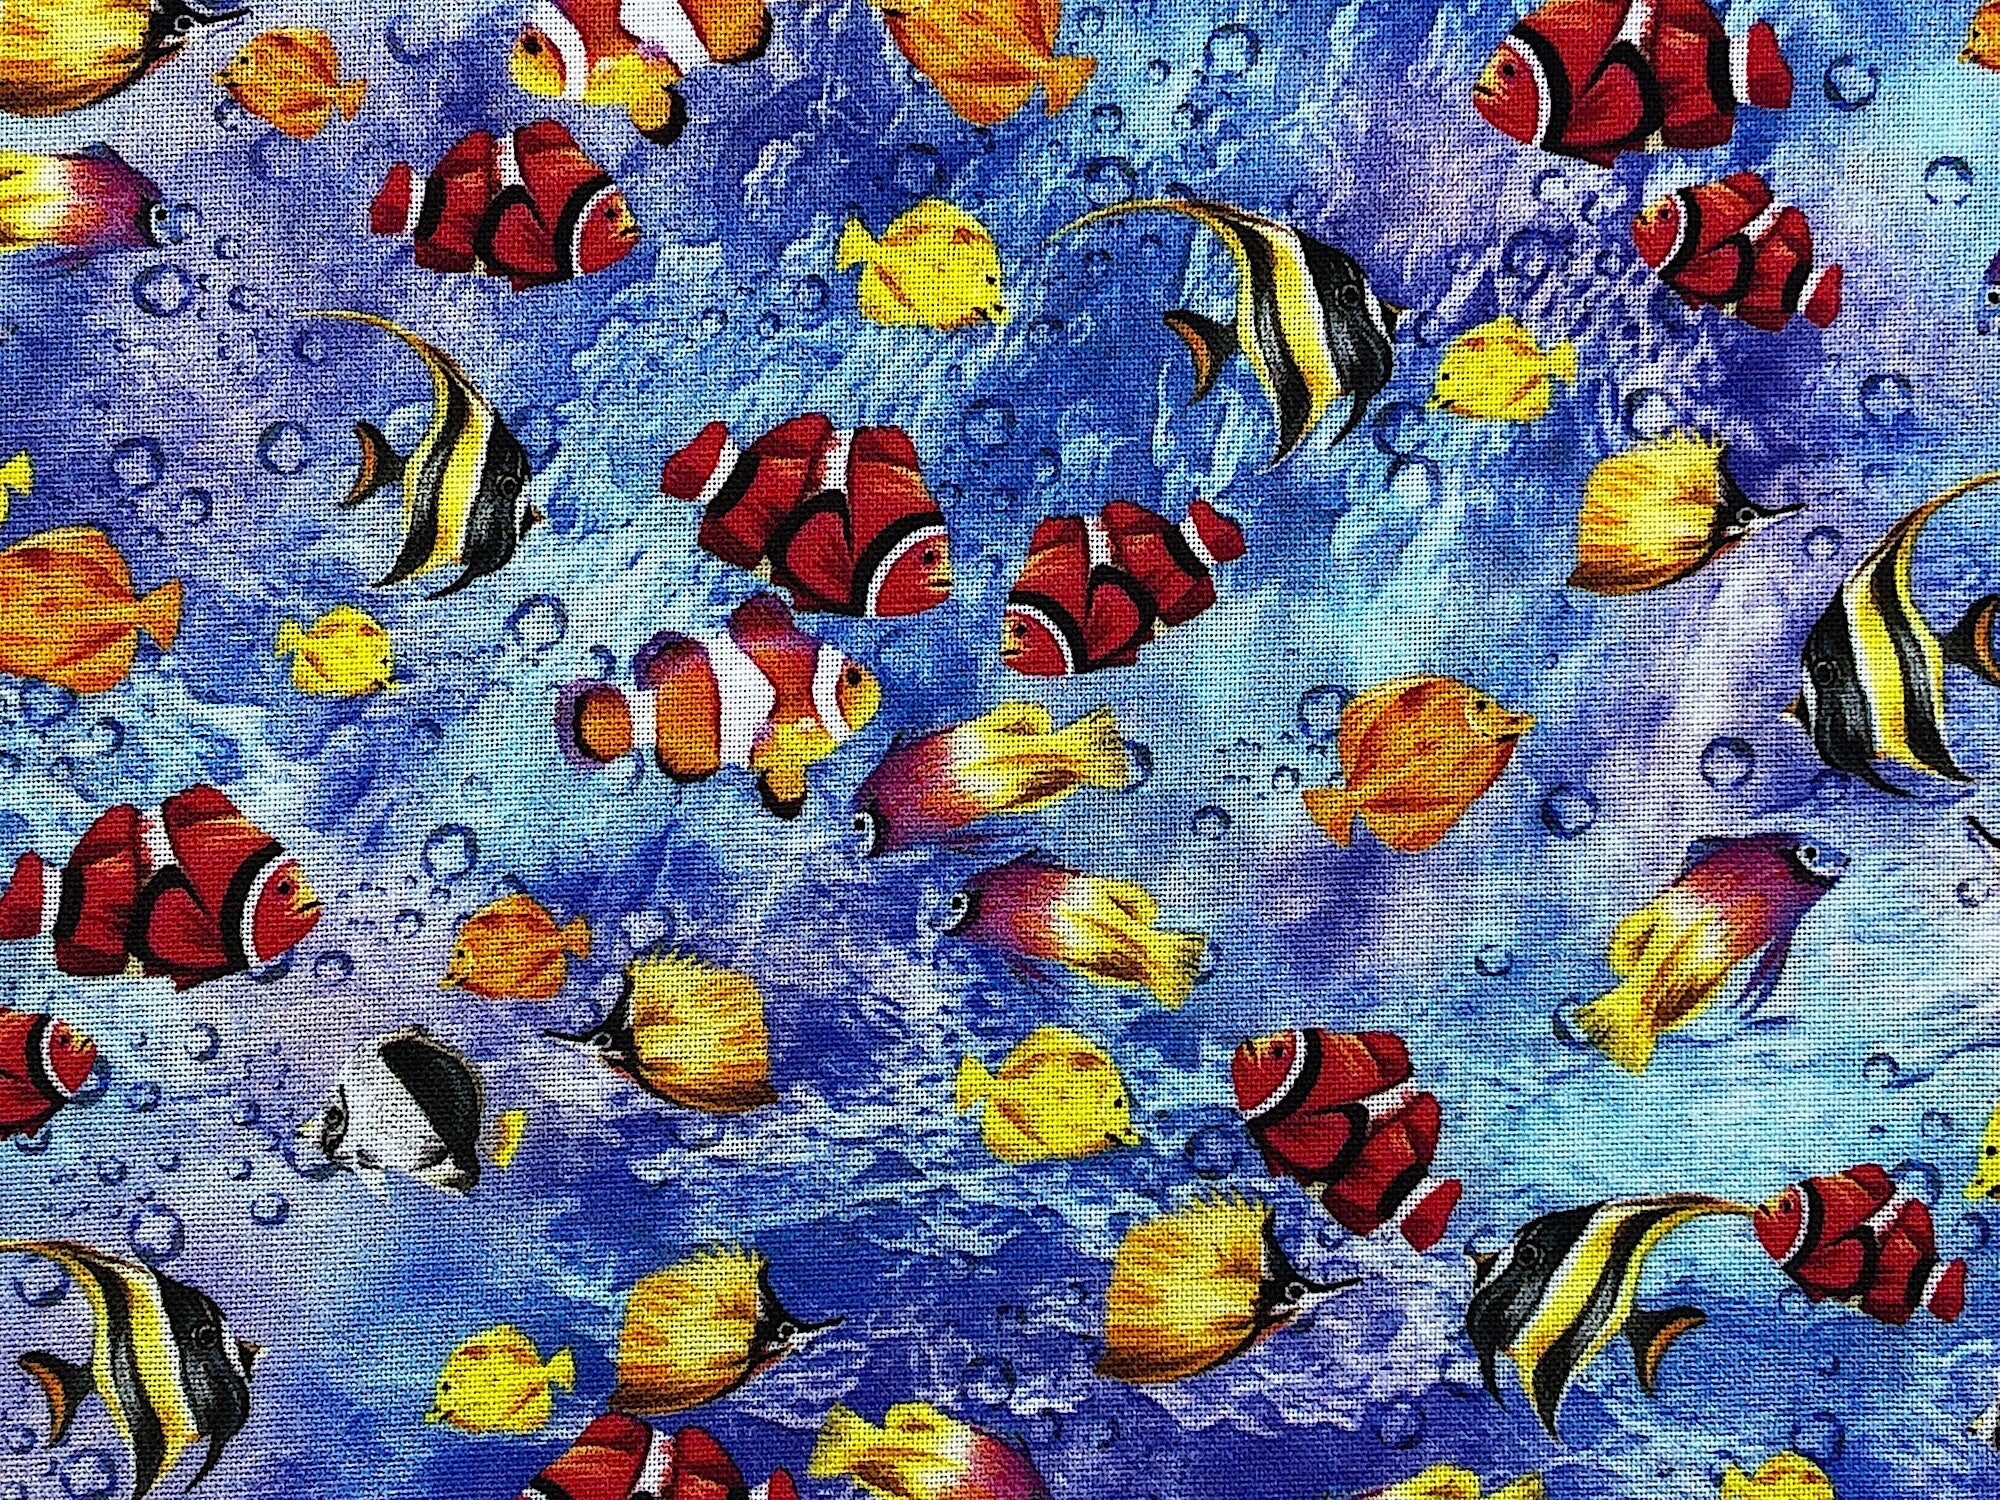 This fabric is part of the Reef Collection and is covered with angel fish, clown fish and more